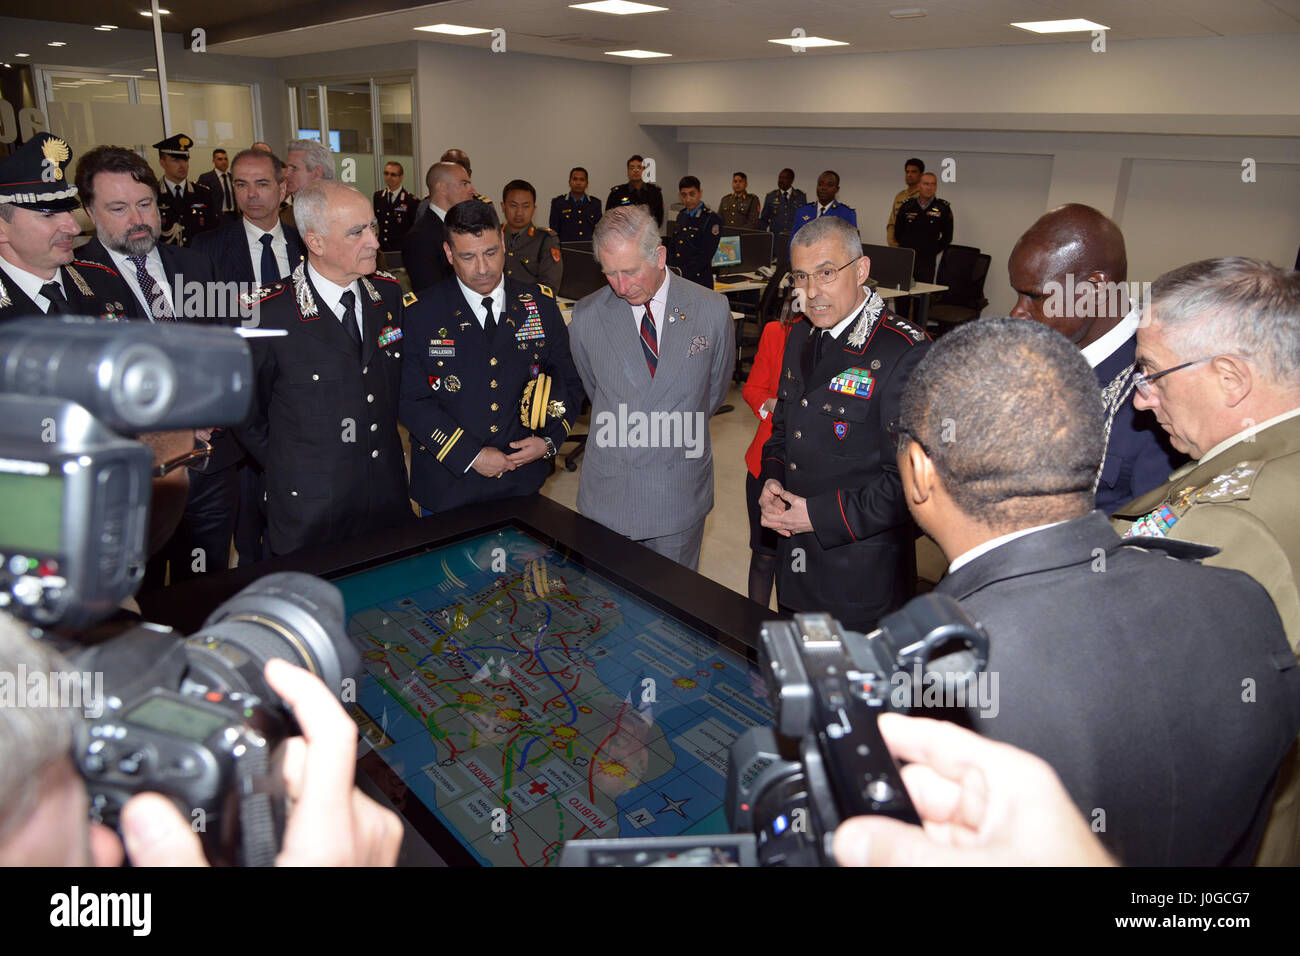 The Royal Highness, Prince Charles, Prince of Wales, observes the training room 'Magistra' during visit at Center of Excellence for Stability Police Units (CoESPU) Vicenza, Italy, April 1, 2017. (U.S. Army Photo by Visual Information Specialist Antonio Bedin/released) Stock Photo